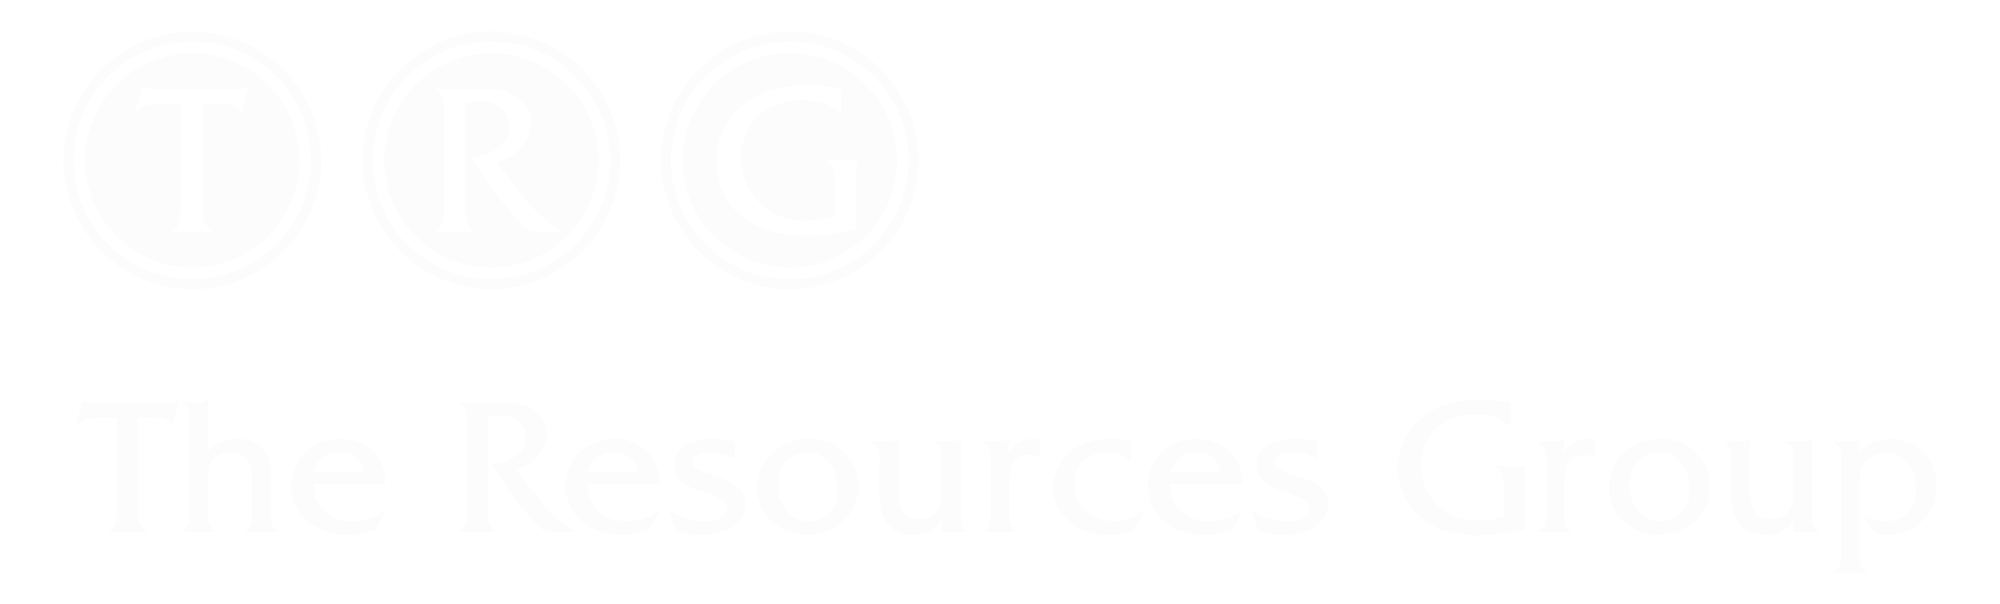 The Resources Group